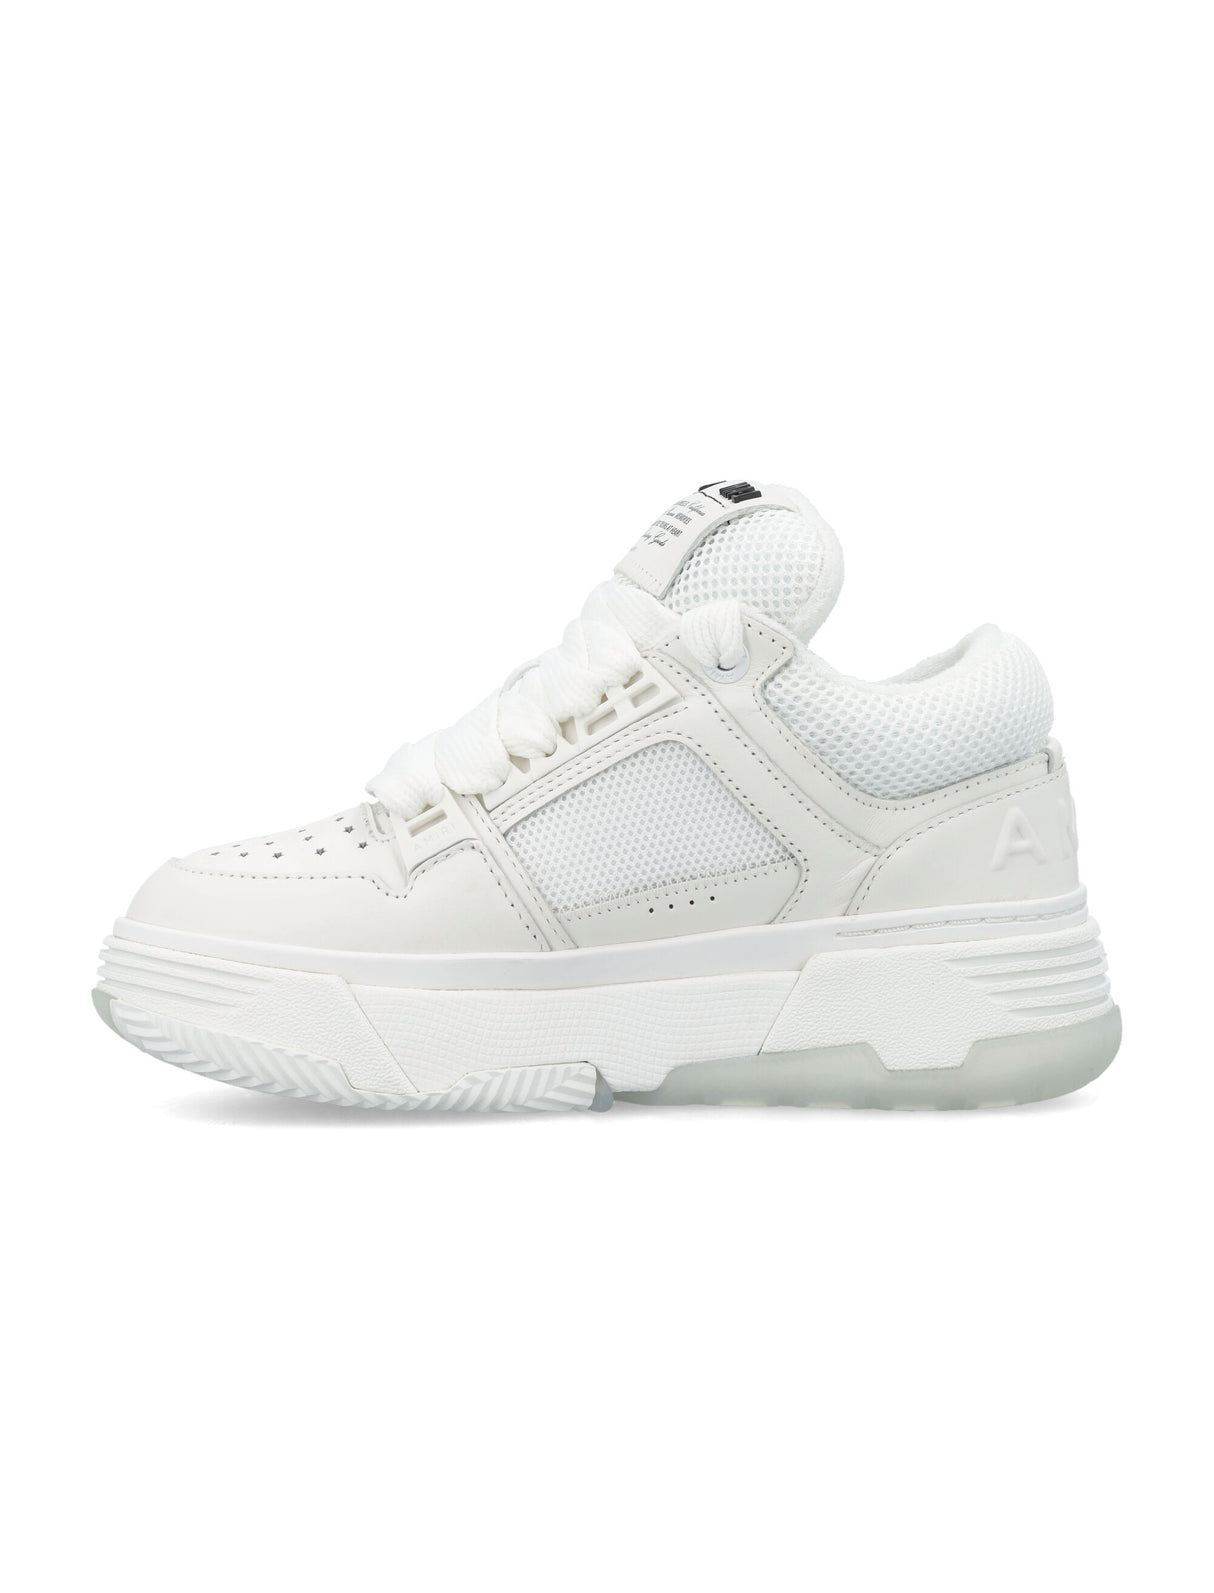 AMIRI Low-Top White Sneakers with Quilted Nubuck Tongue and Perforated Panels for Women